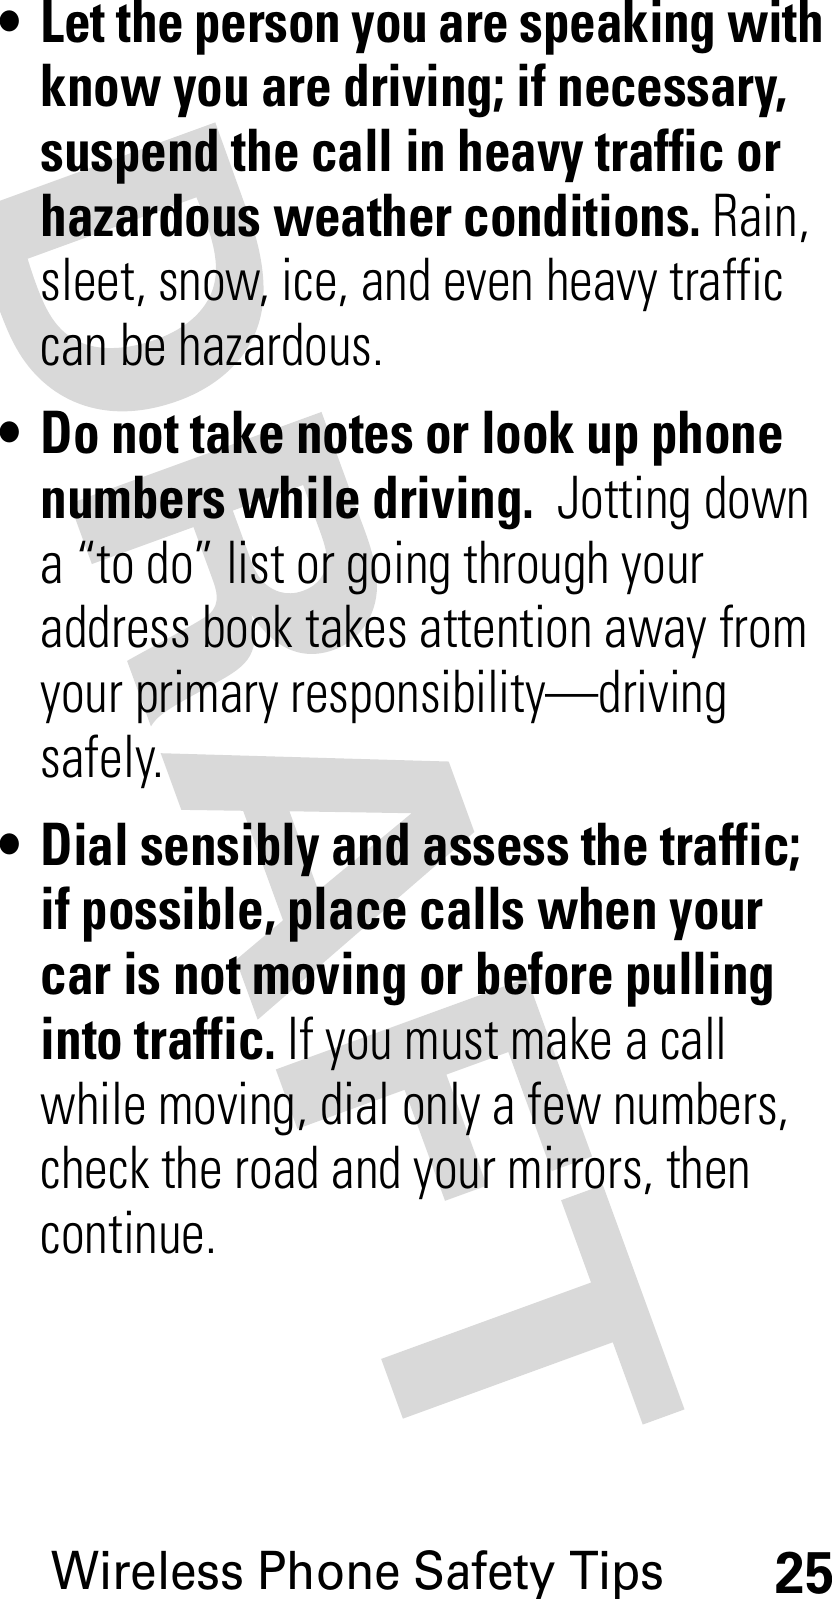 Wireless Phone Safety Tips25• Let the person you are speaking with know you are driving; if necessary, suspend the call in heavy traffic or hazardous weather conditions. Rain, sleet, snow, ice, and even heavy traffic can be hazardous.• Do not take notes or look up phone numbers while driving.  Jotting down a “to do” list or going through your address book takes attention away from your primary responsibility—driving safely.• Dial sensibly and assess the traffic; if possible, place calls when your car is not moving or before pulling into traffic. If you must make a call while moving, dial only a few numbers, check the road and your mirrors, then continue.